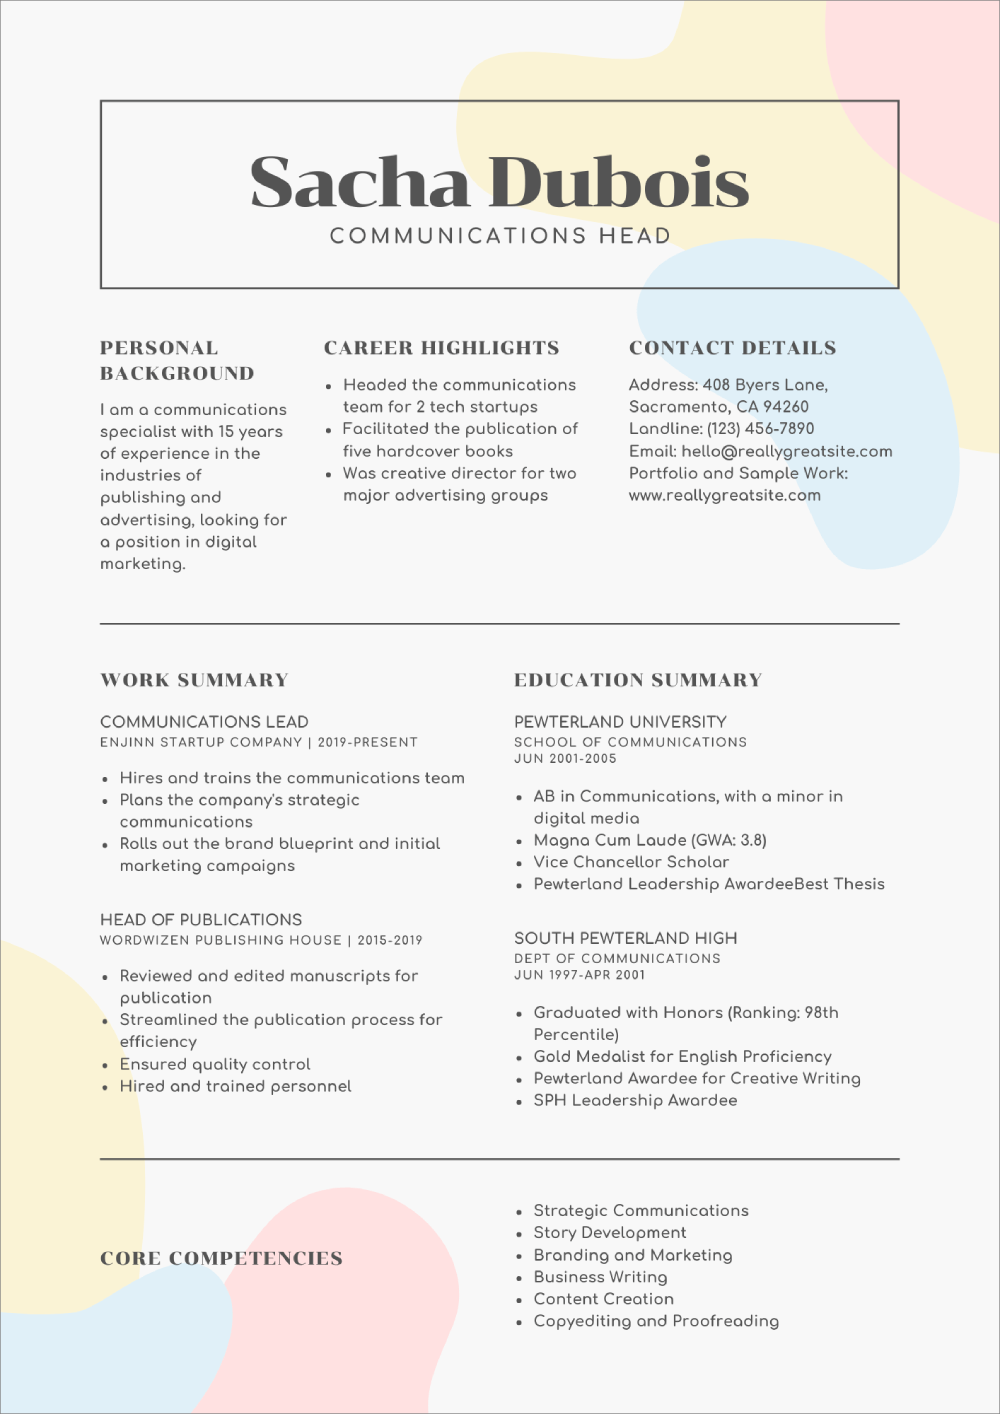 Canva Templates Resume from cdn-images.zety.com